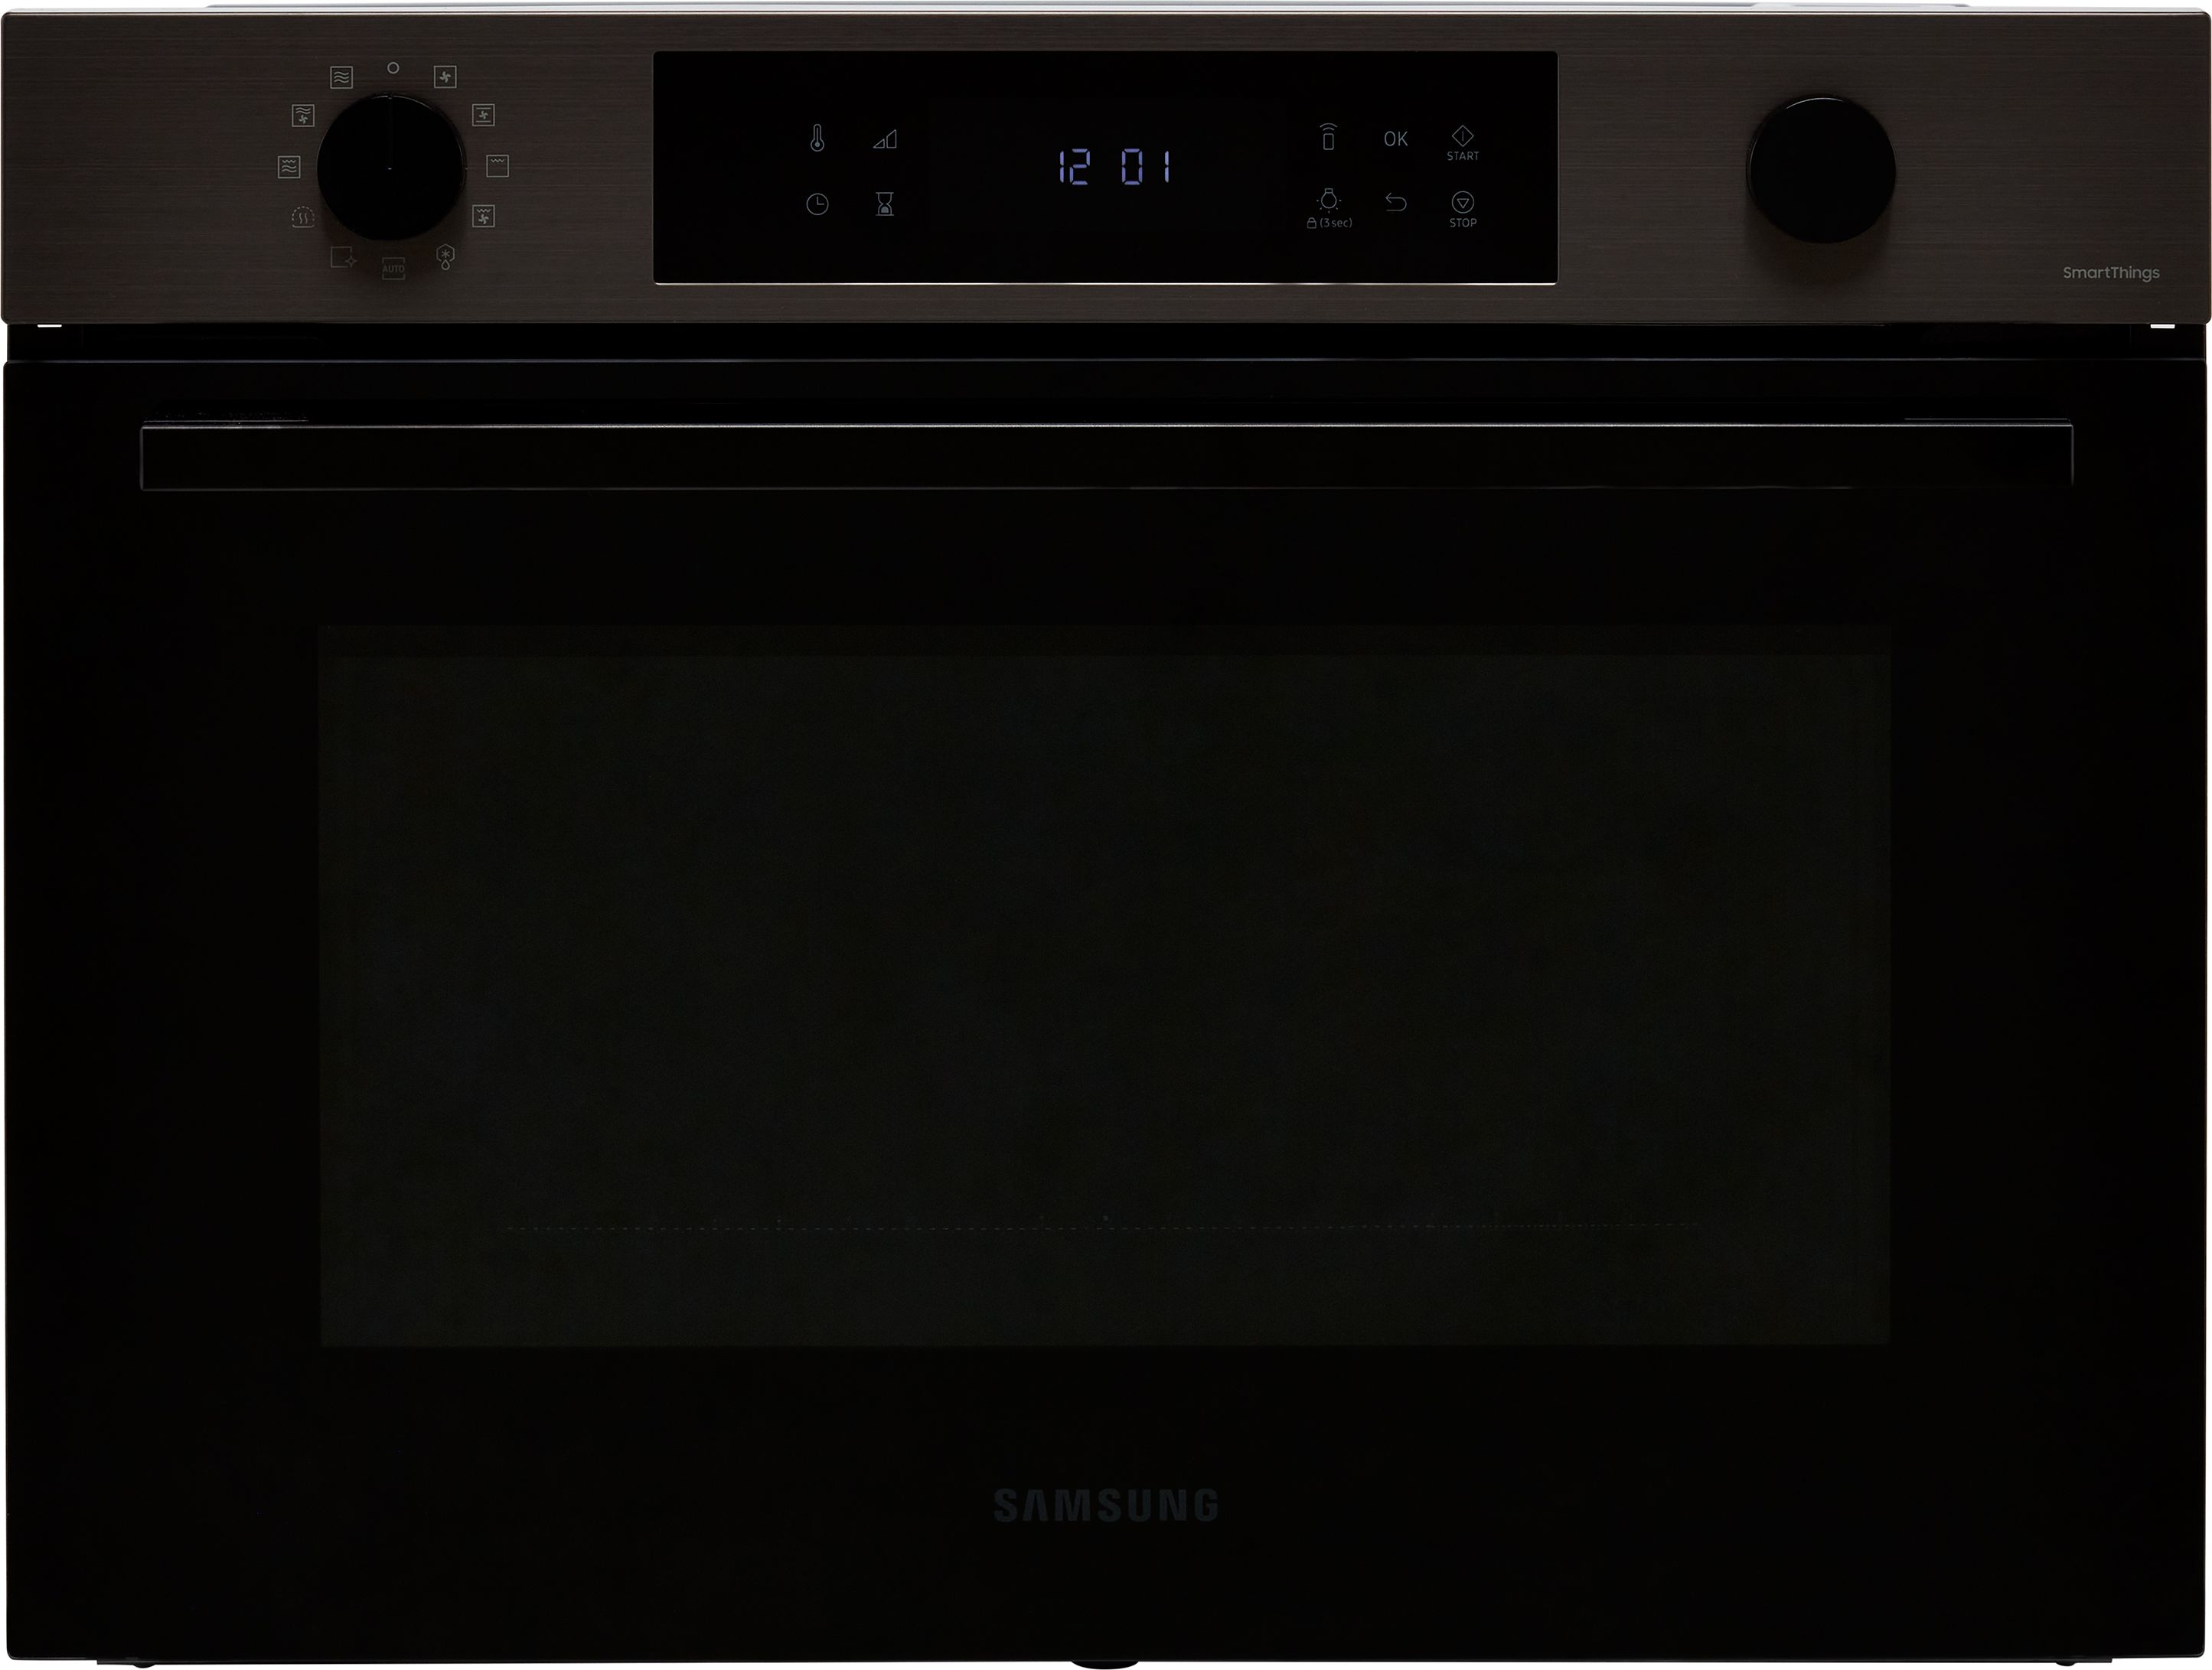 Samsung Series 4 NQ5B4553FBB Wifi Connected Built In Compact Electric Single Oven - Black / Stainless Steel, Black